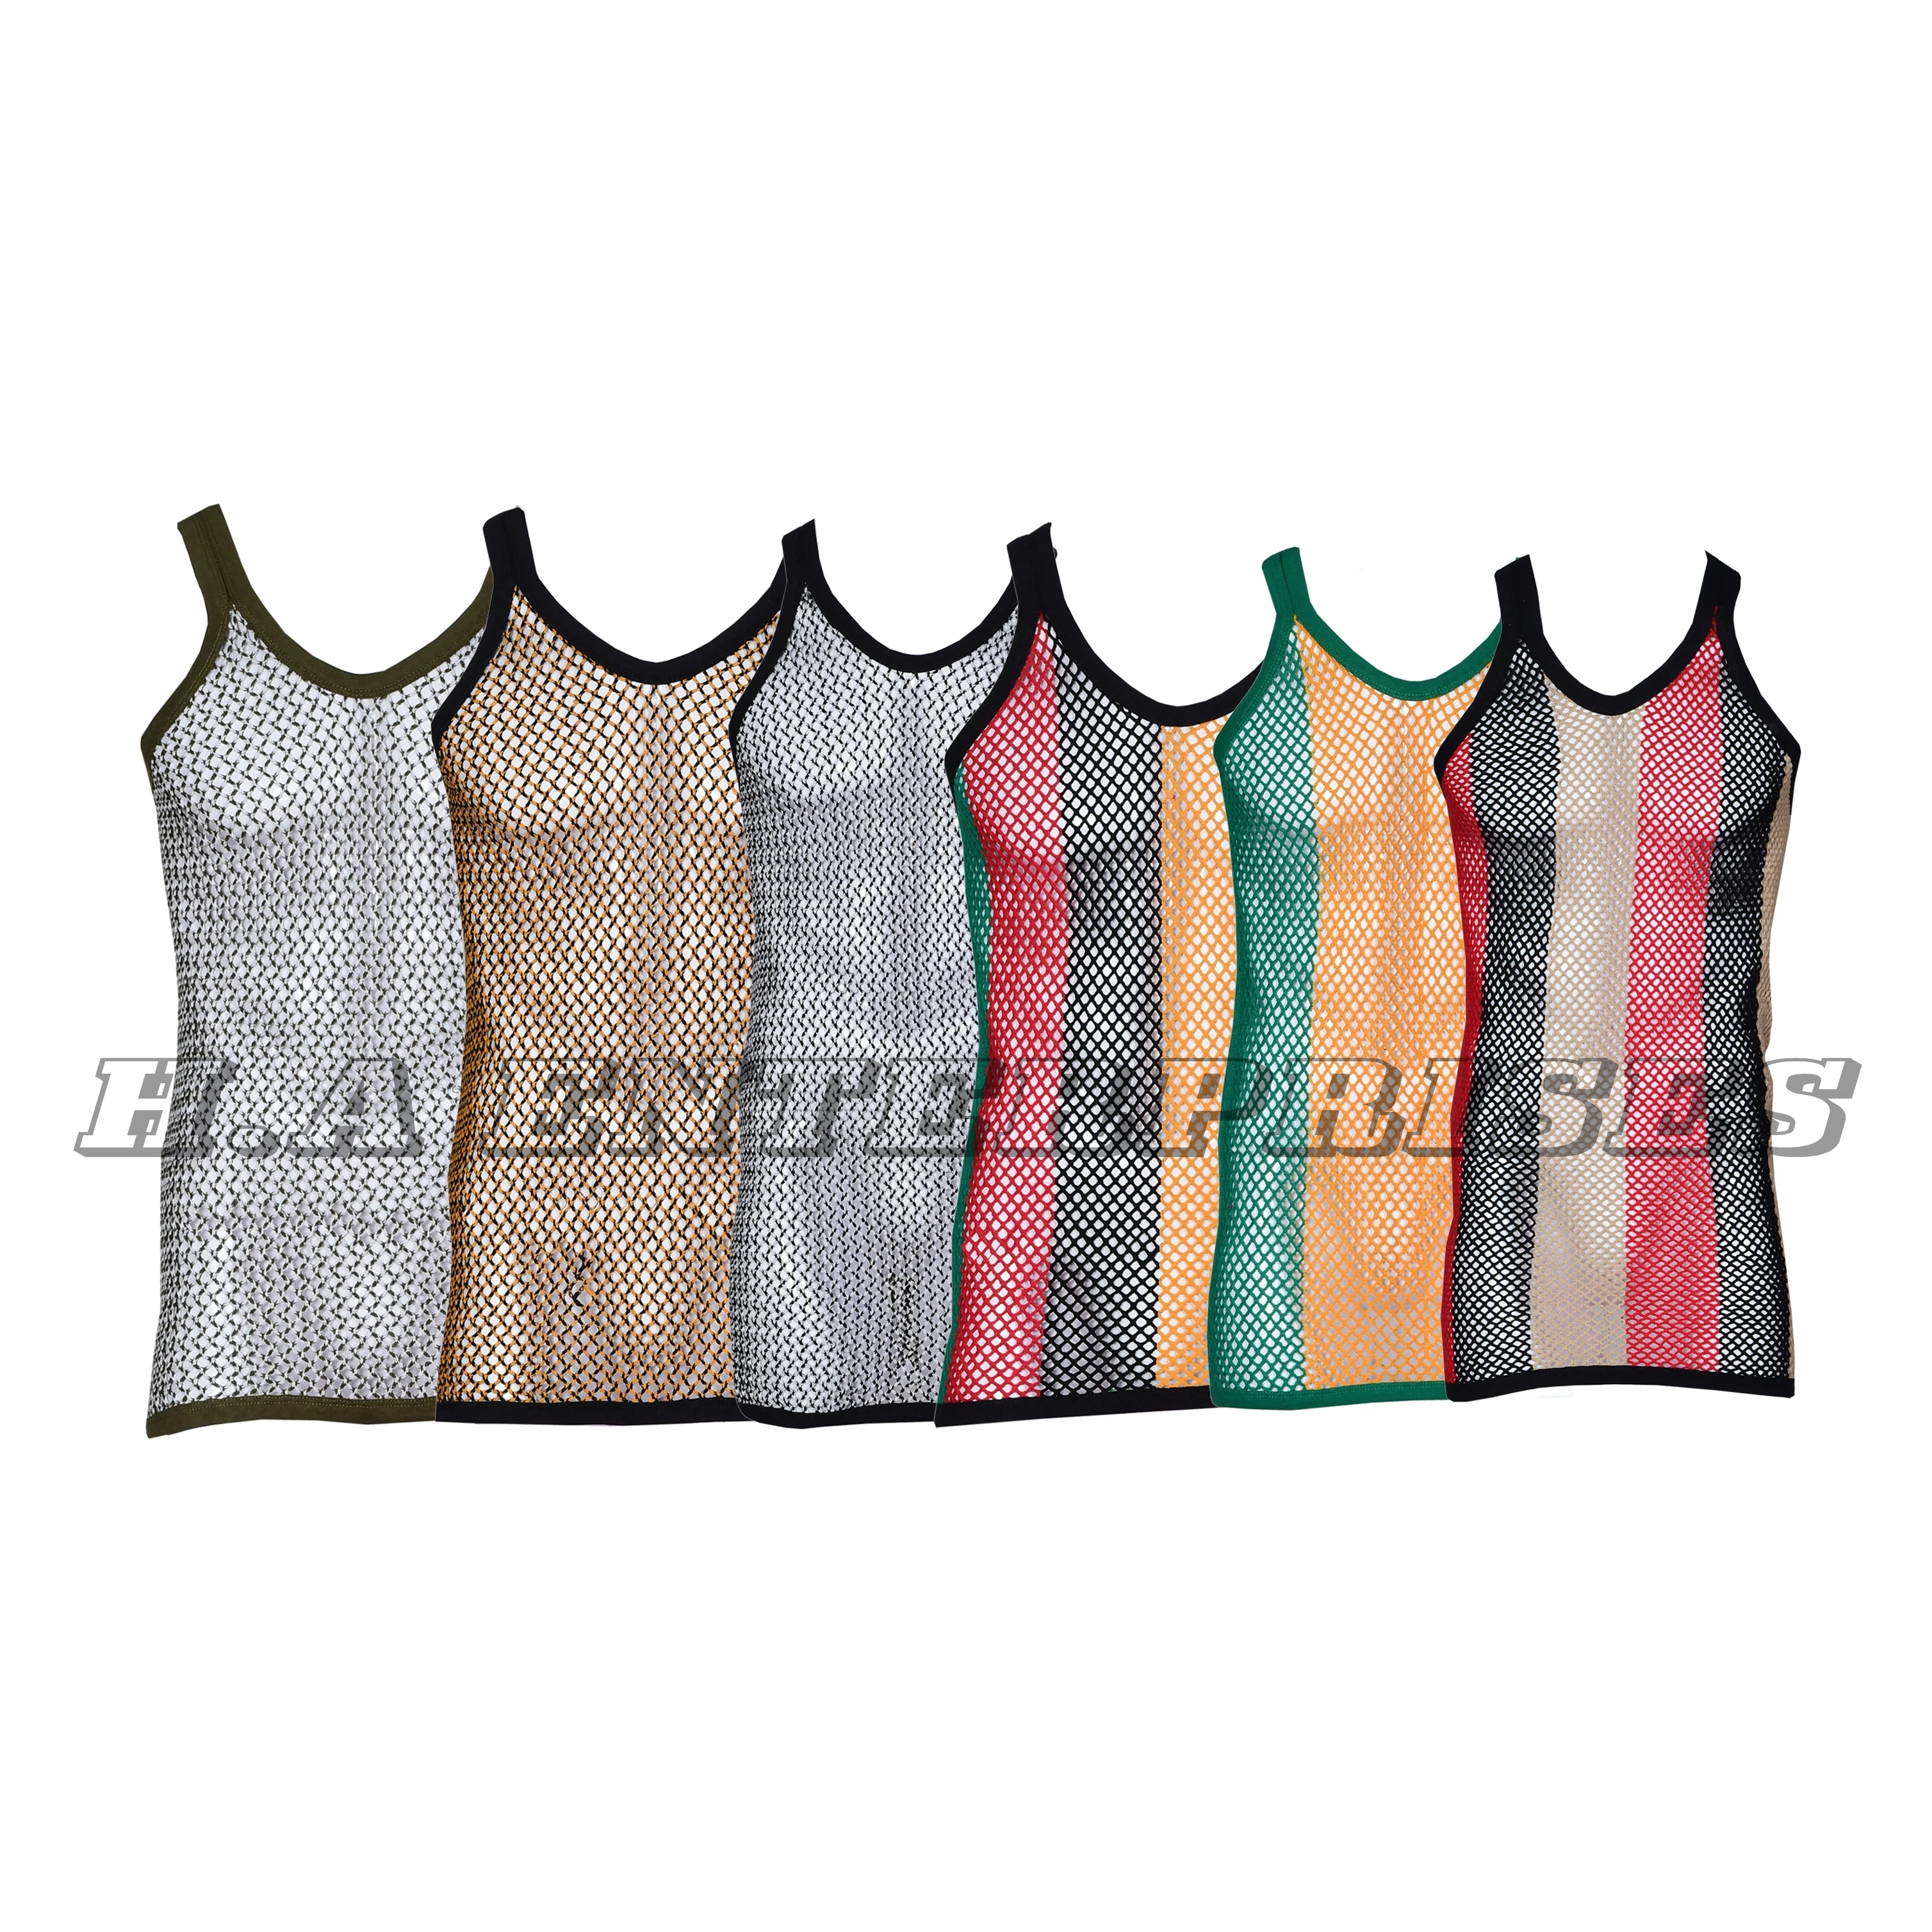 Mens Ladies 100% Cotton Club Star Mesh Fishnet Fitted String Vest  S to 6XL size 